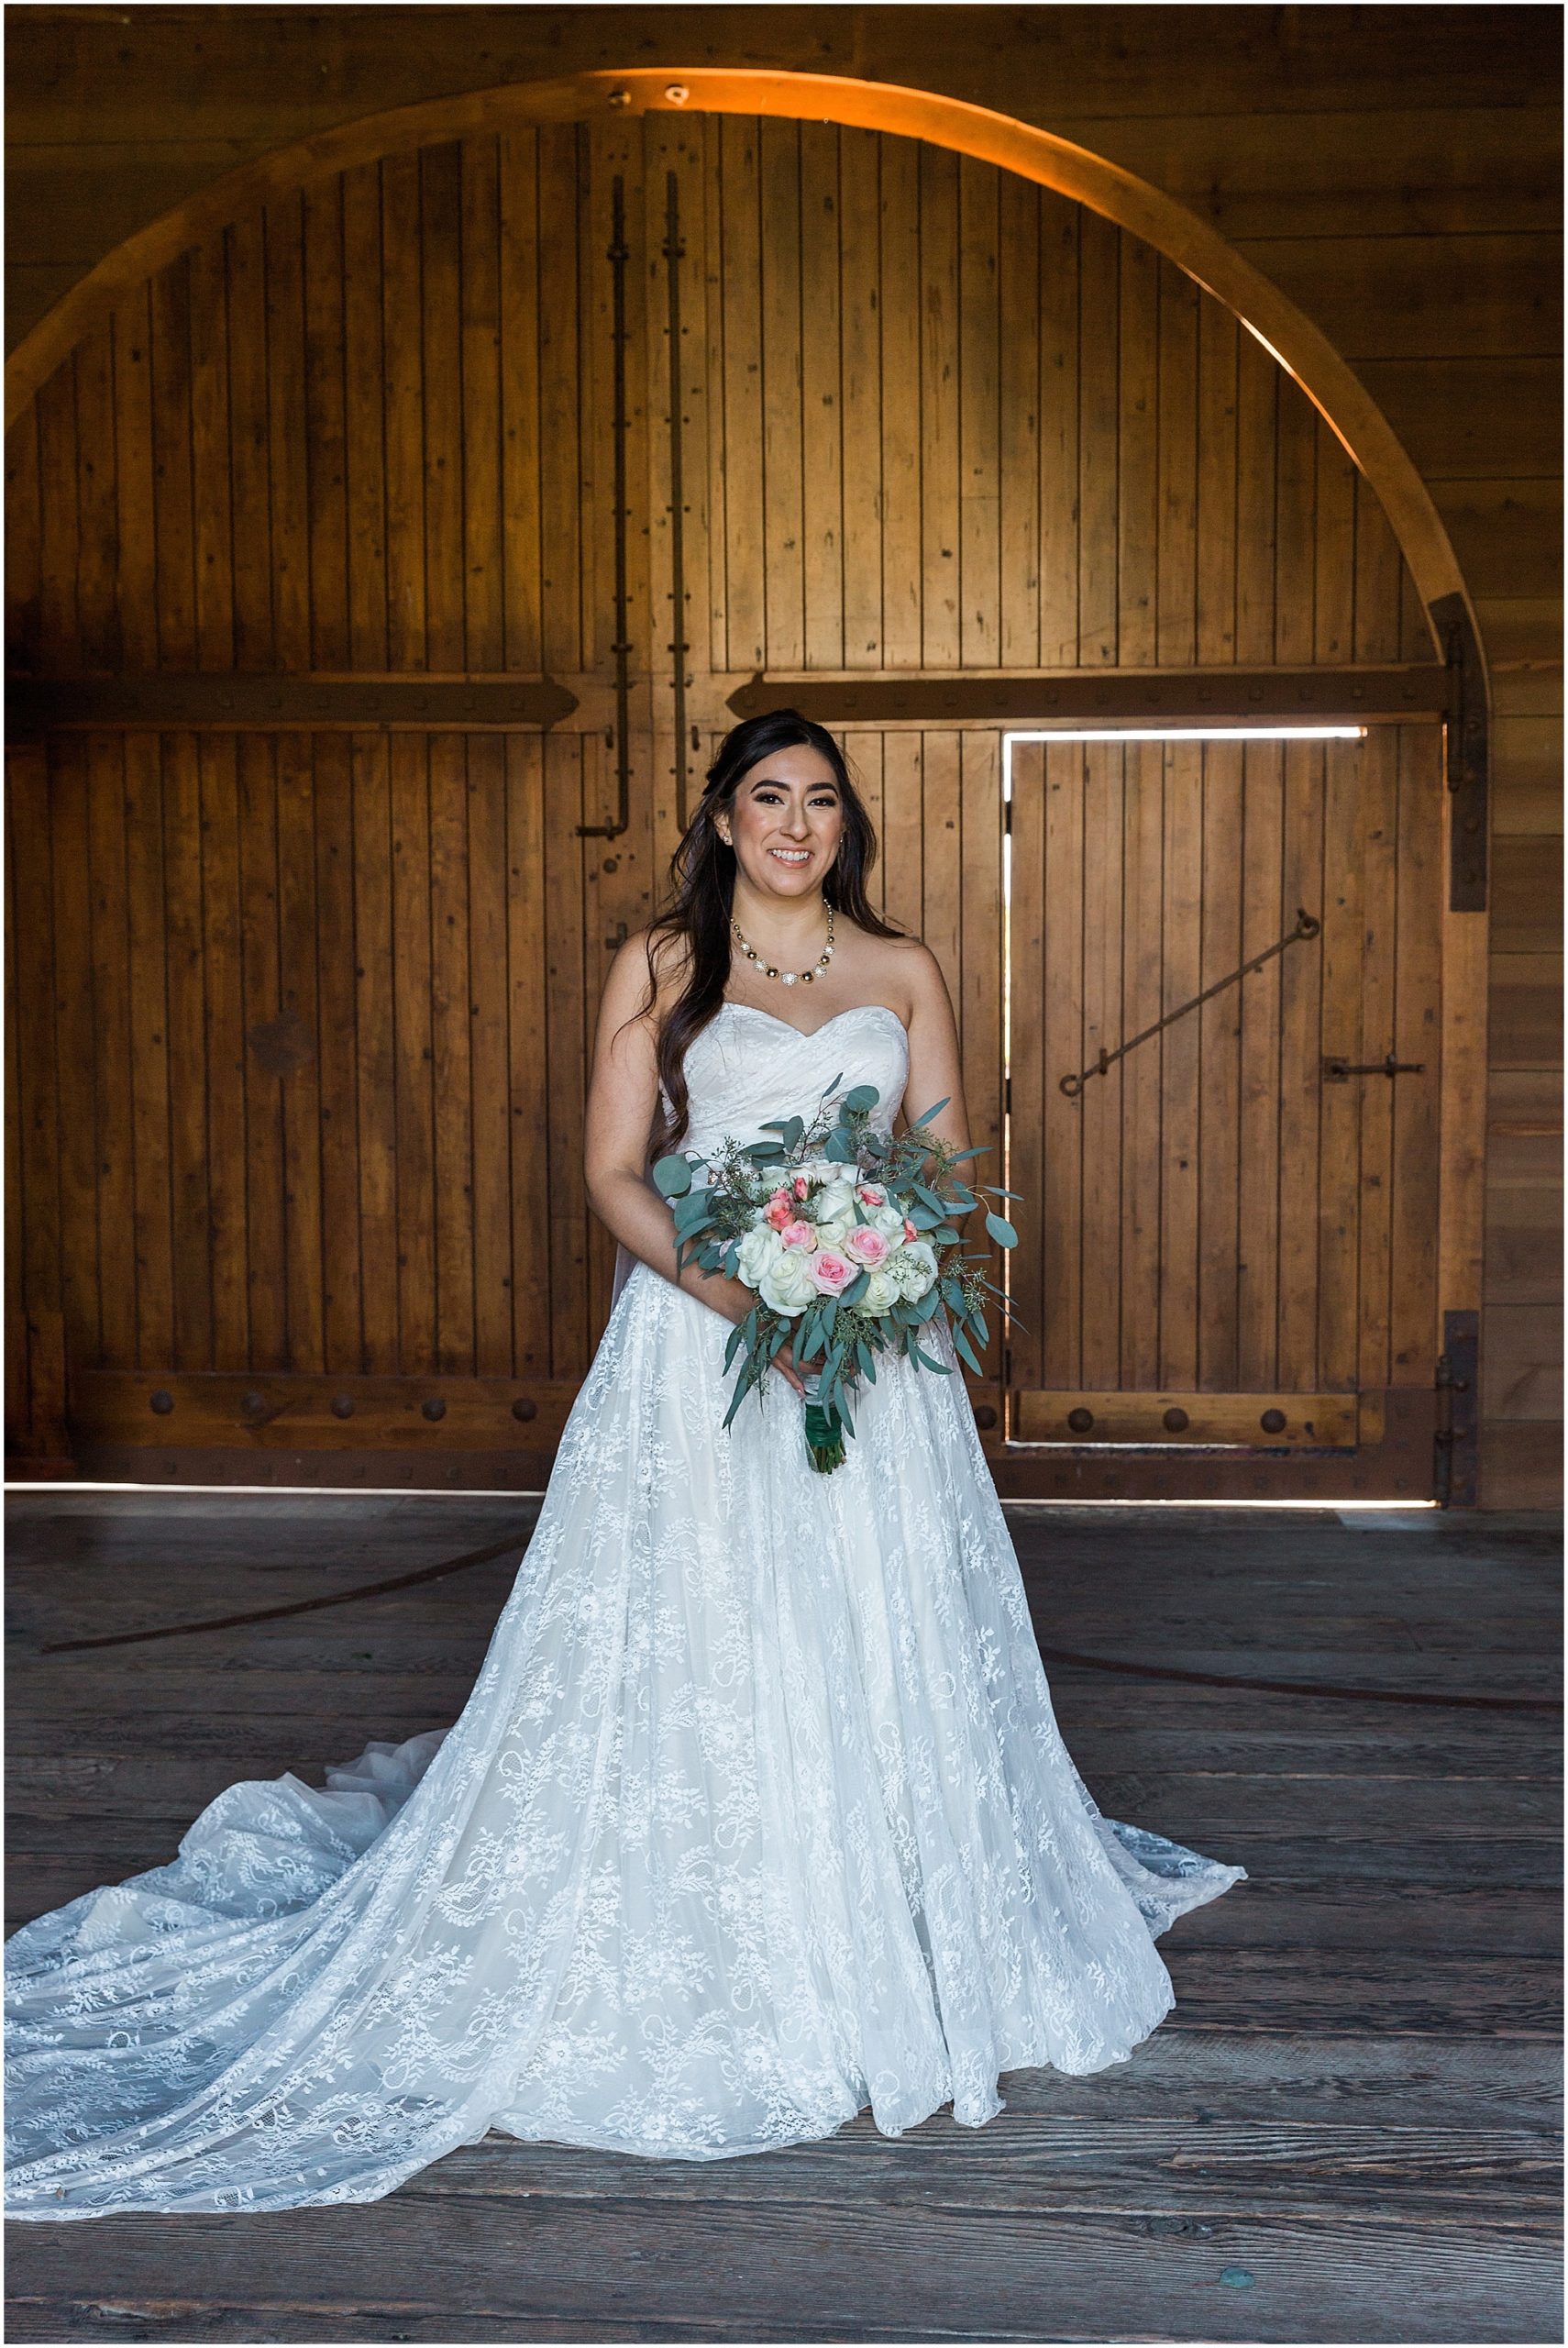 A gorgeous bridal portrait inside the Tuscan Stables venue at the Ranch at the Canyons fall wedding in Terrebonne, OR. | Erica Swantek Photography